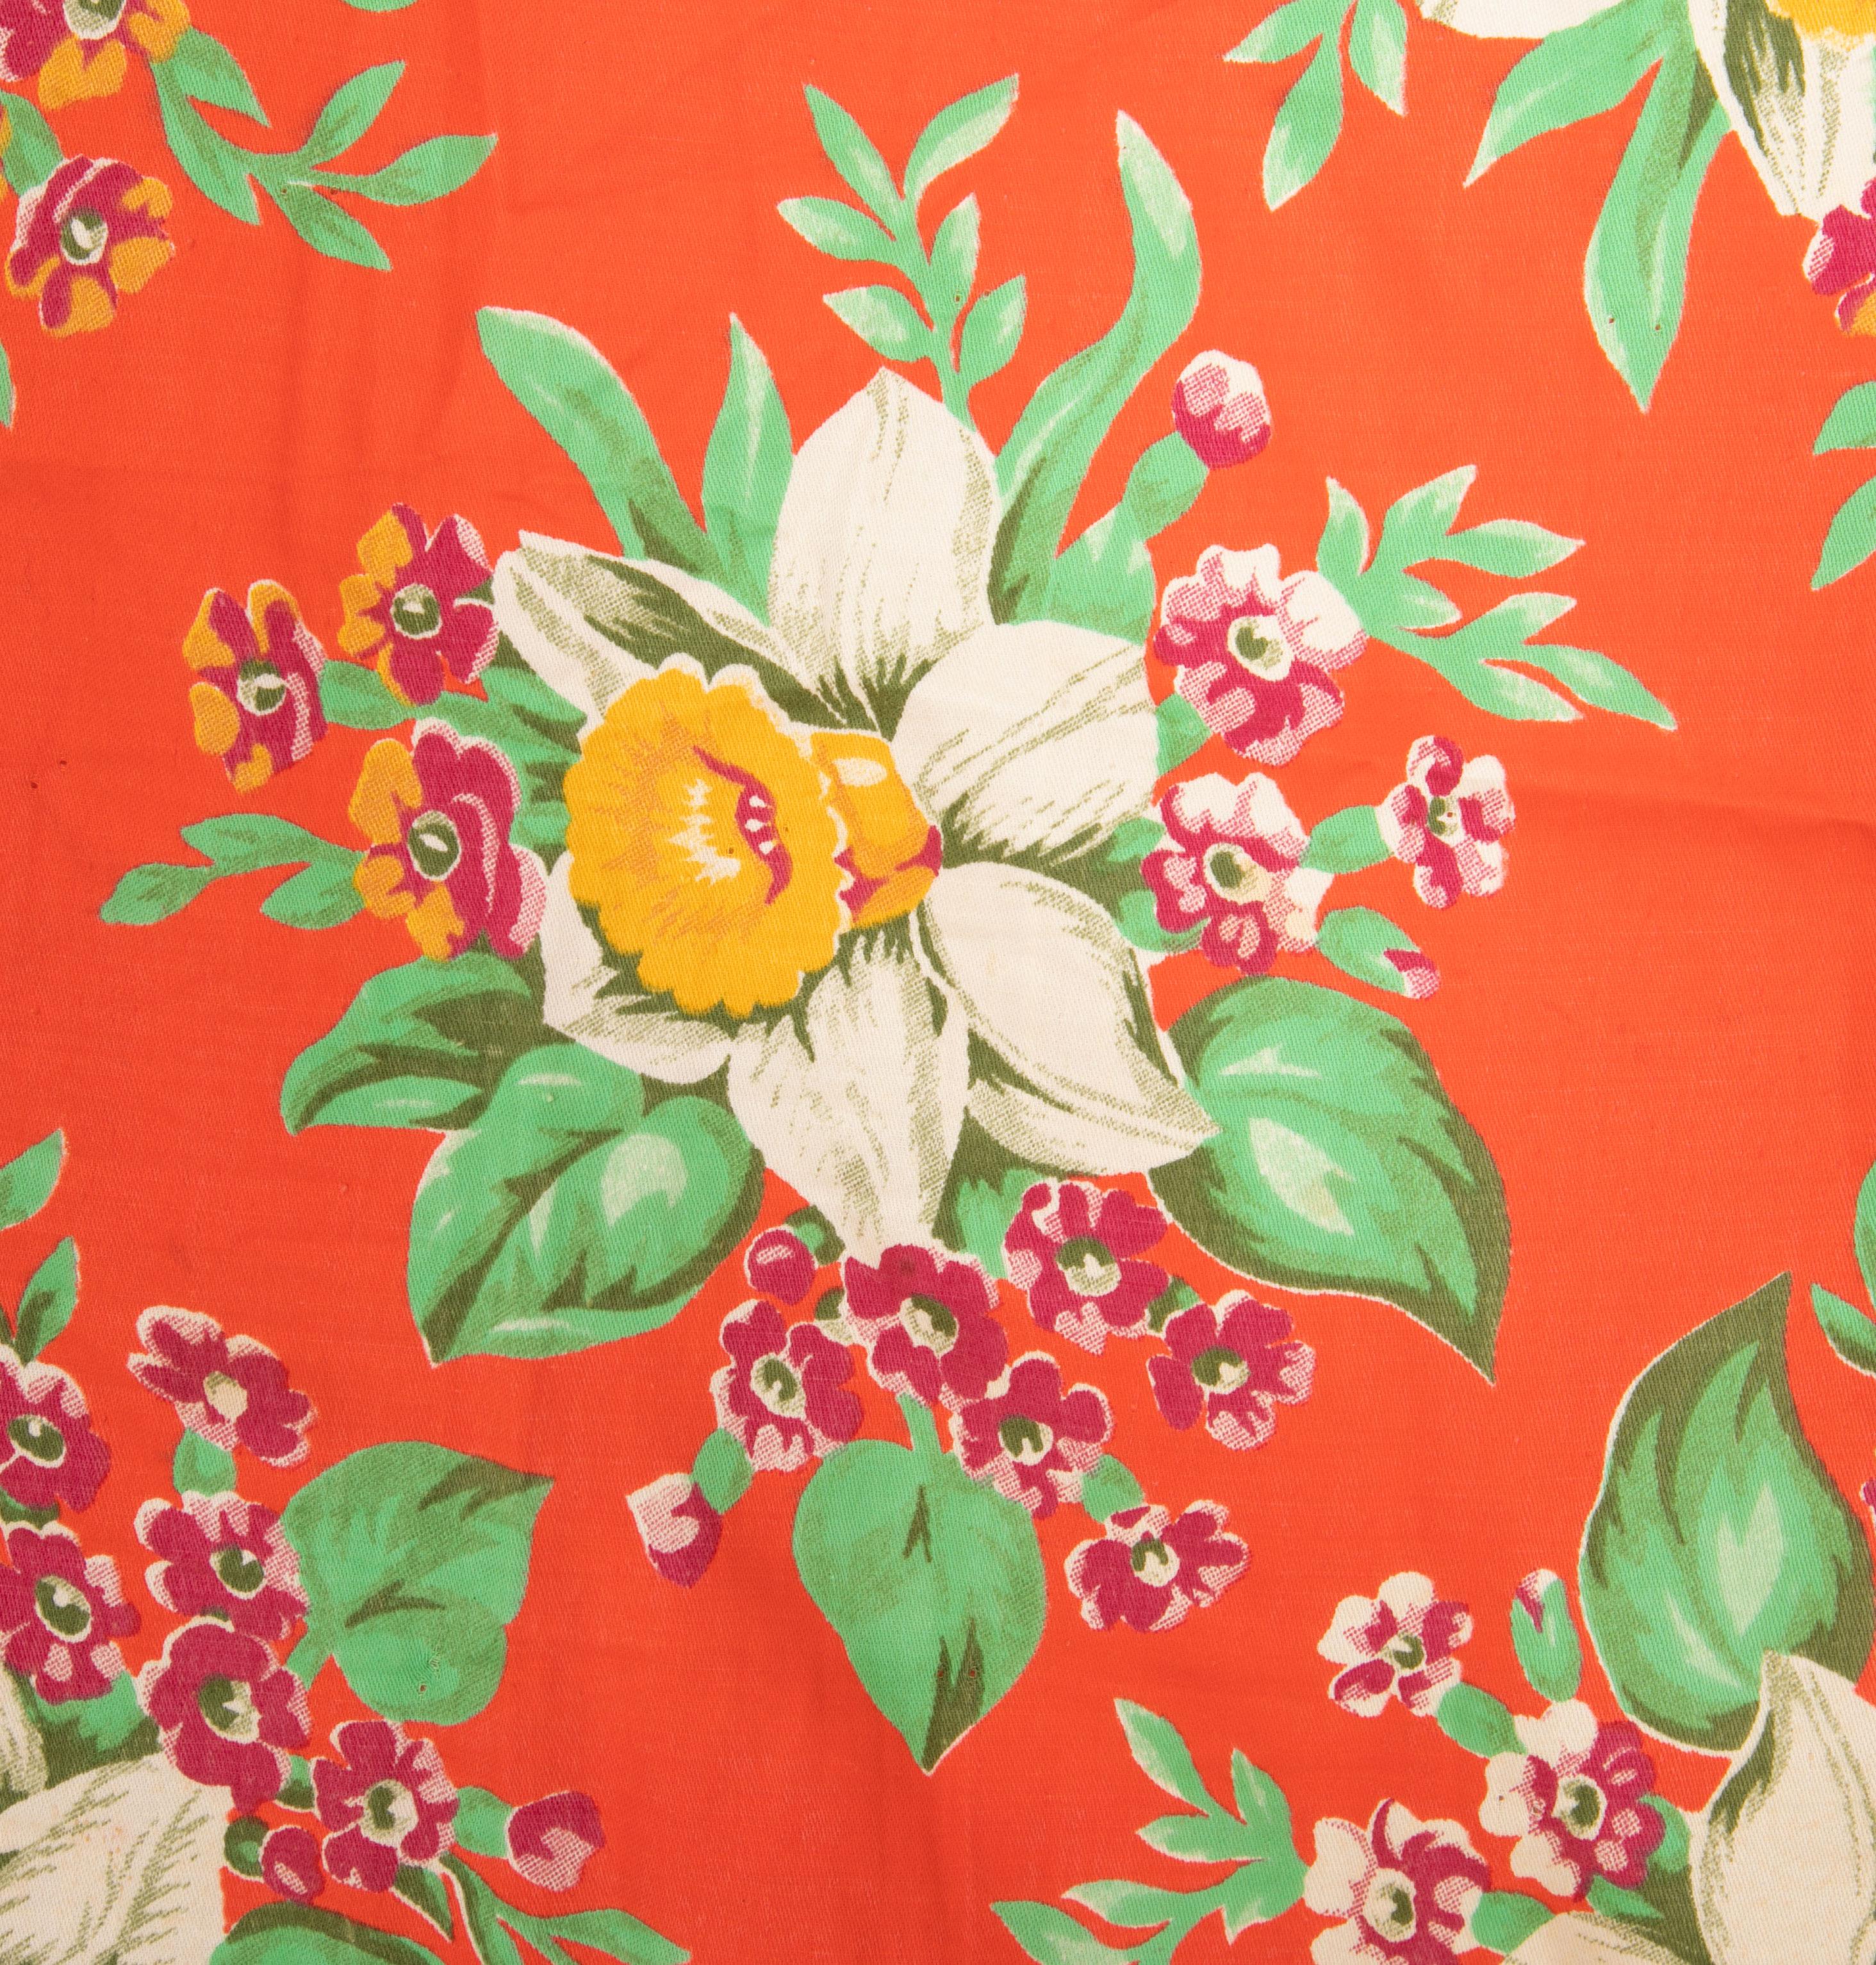 Russian Roller Printed Cotton Fabric Panel, Mid-20th Century or Earlier For Sale 2